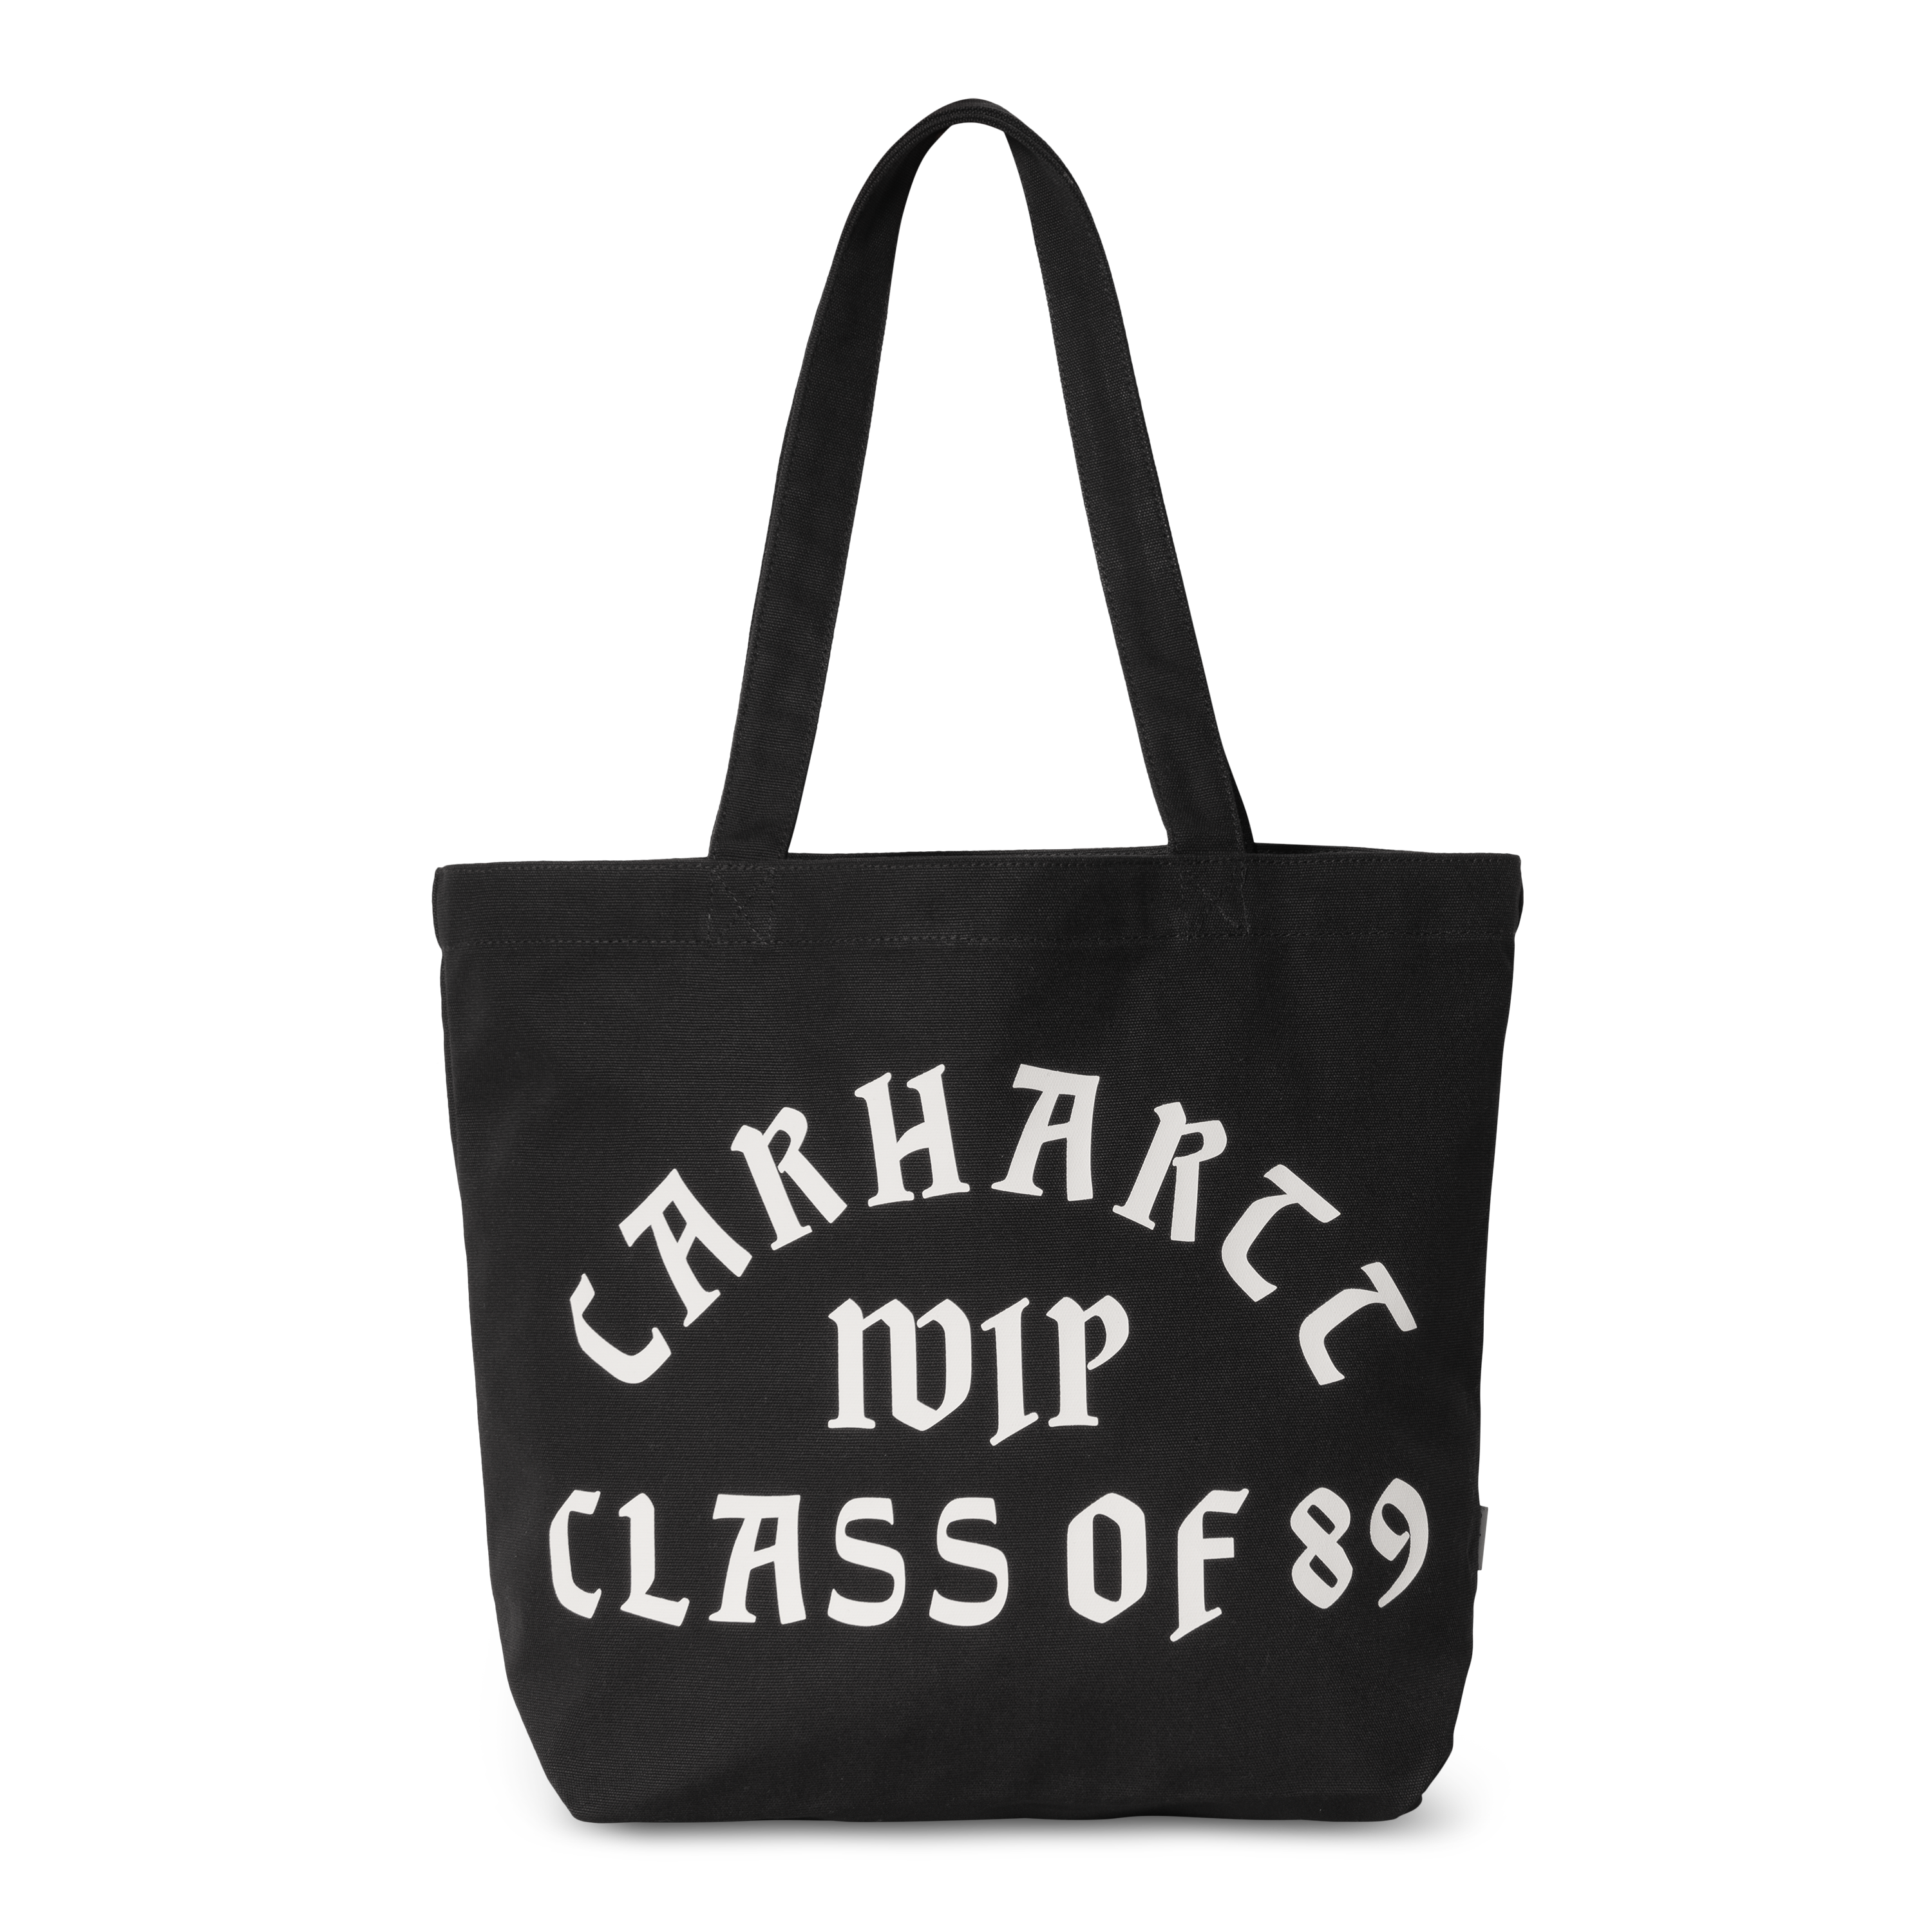 Carhartt WIP Canvas Graphic Tote in Black